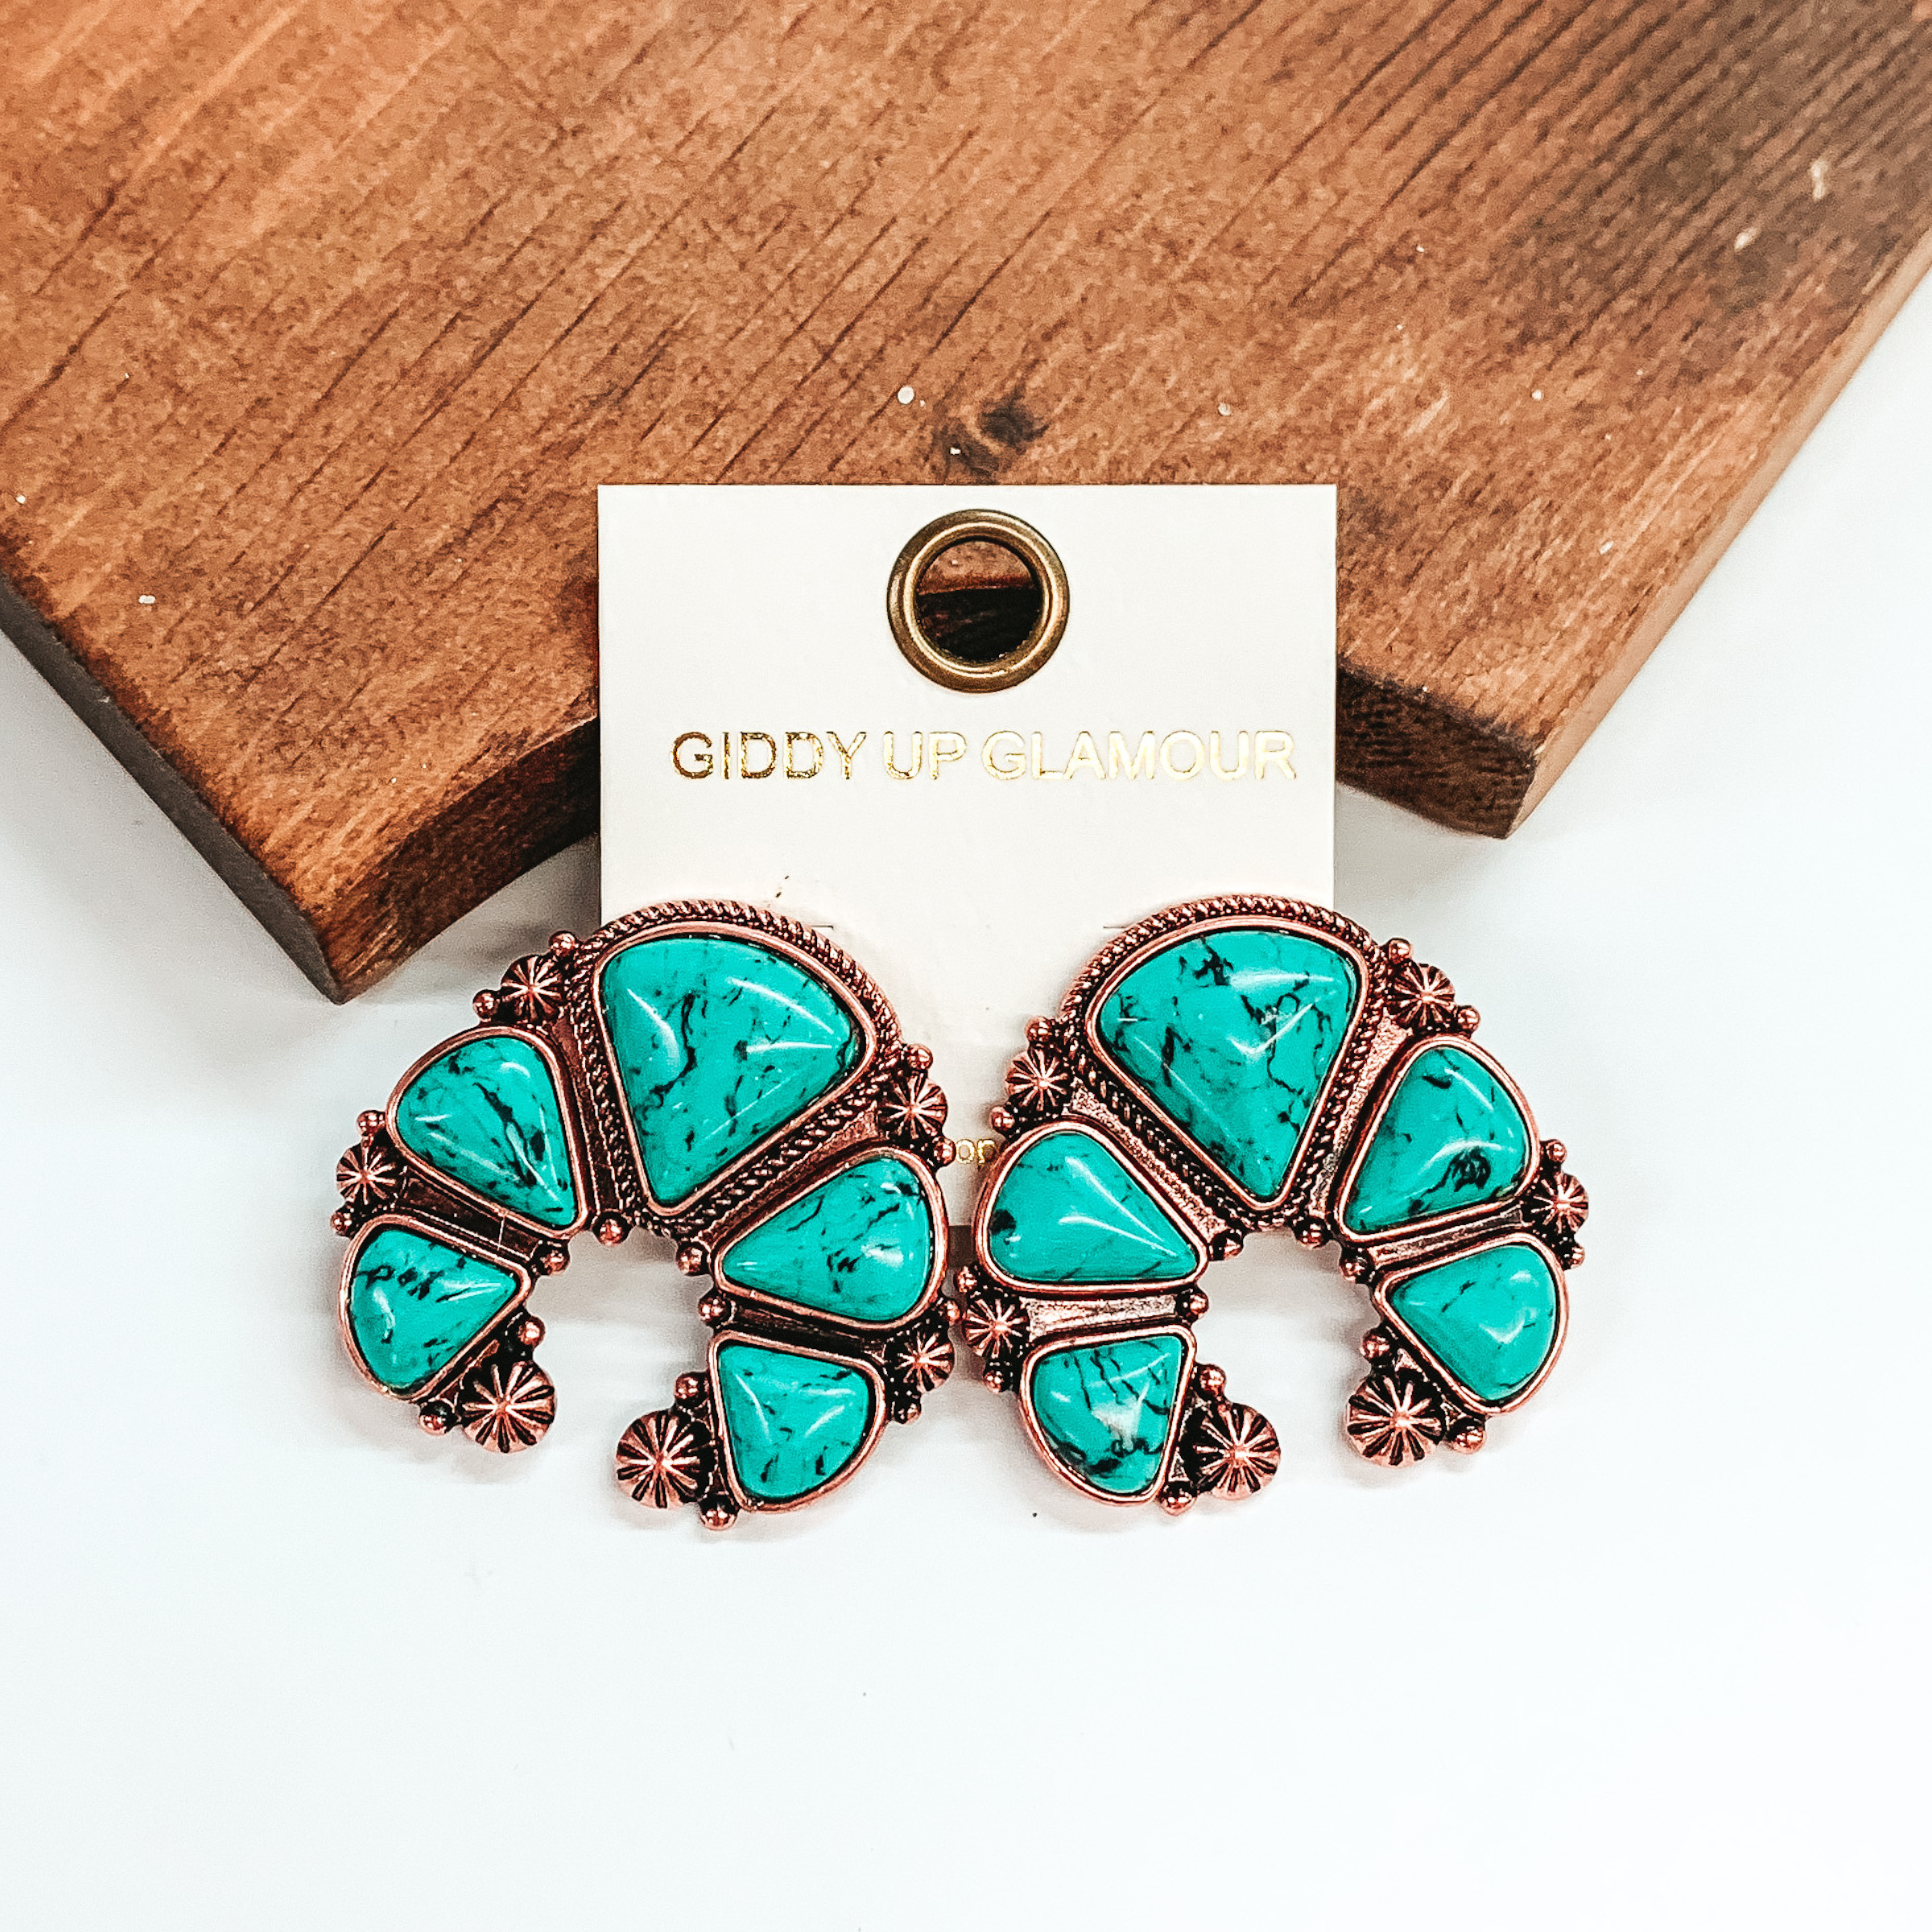 Copper naja earrings with turquoise stones. These earrings are pictured leaning against a brown block on a white background.